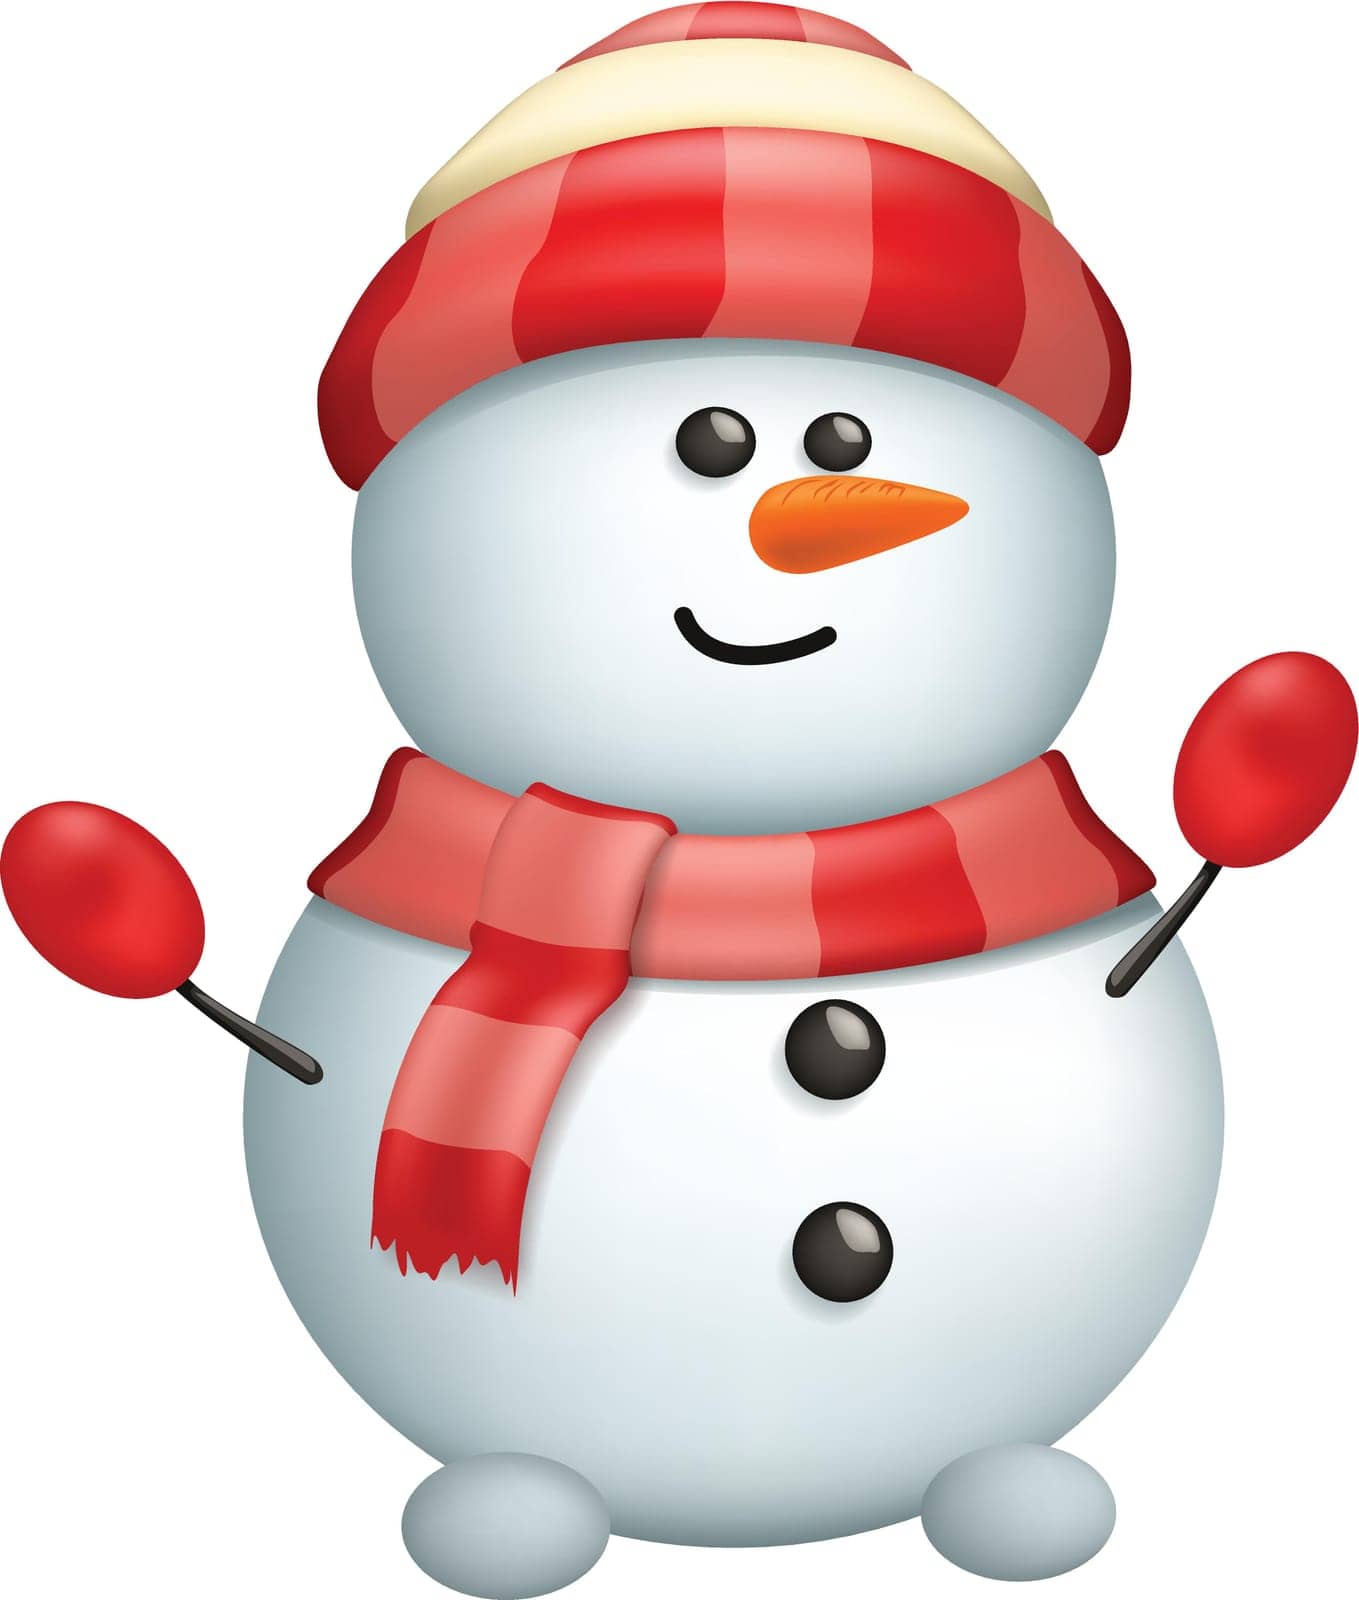 illustration of blue snowman with red hat isolated on white background